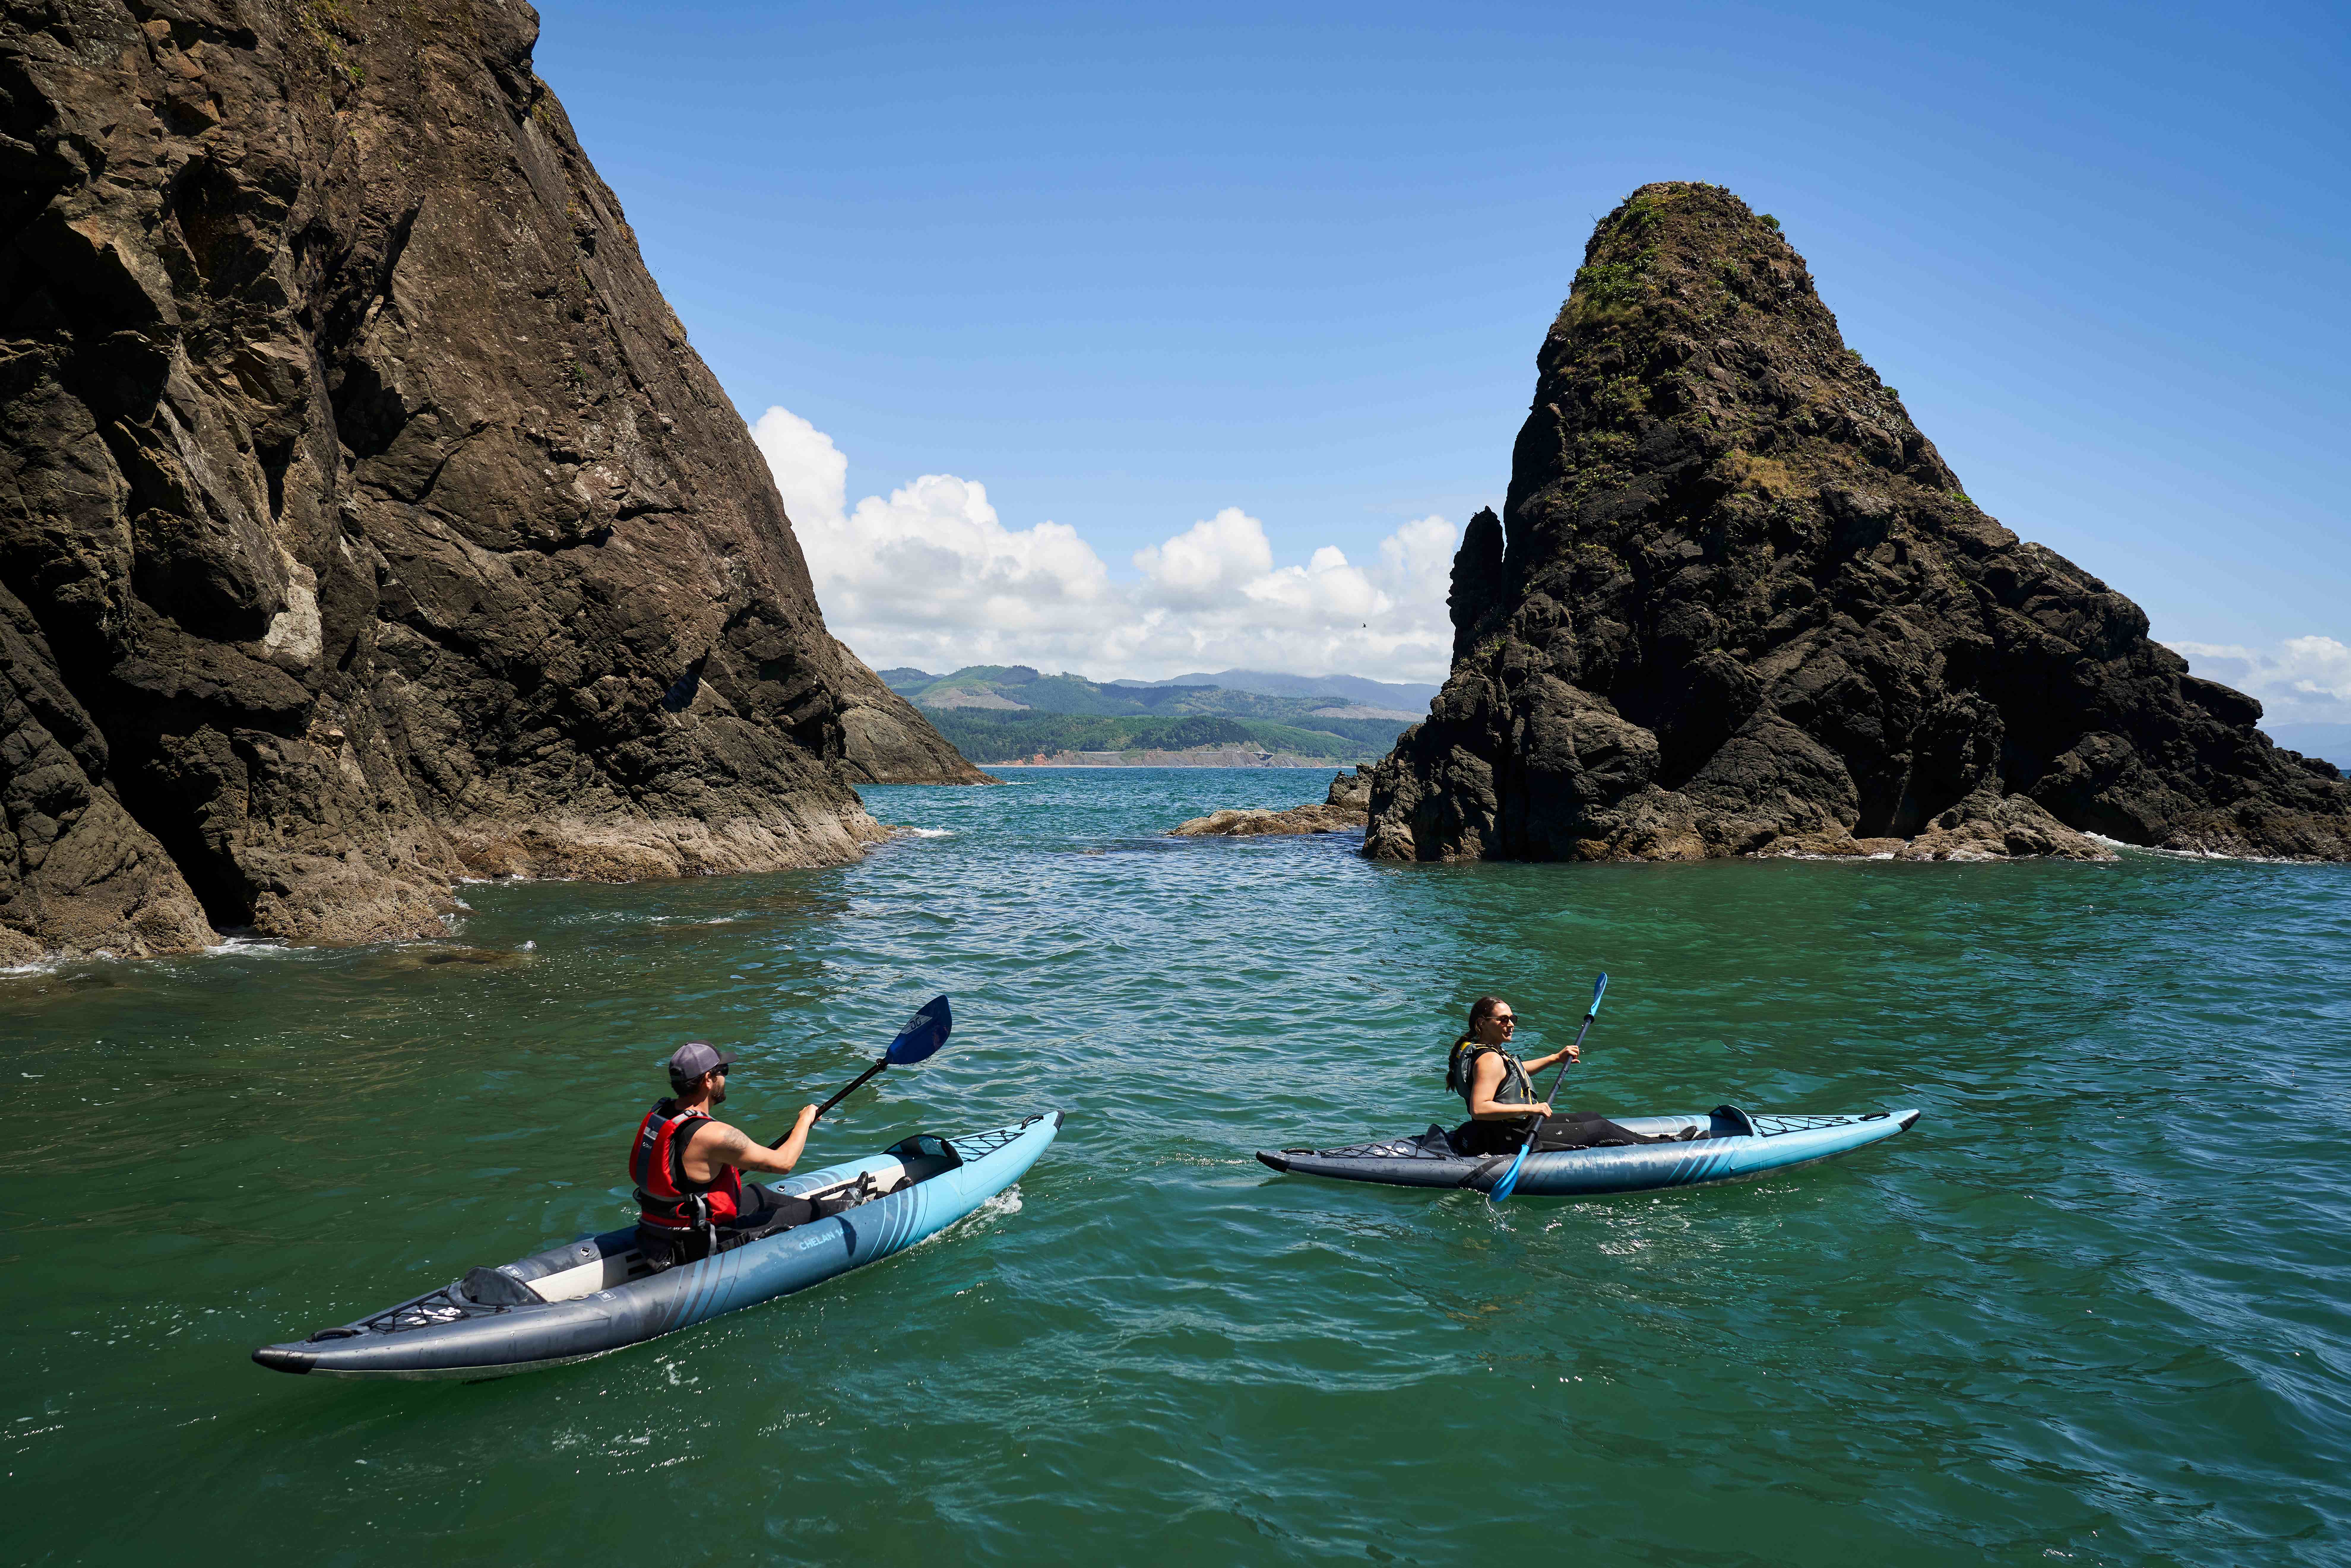 How To Care For Your Saltwater Kayak & SUP